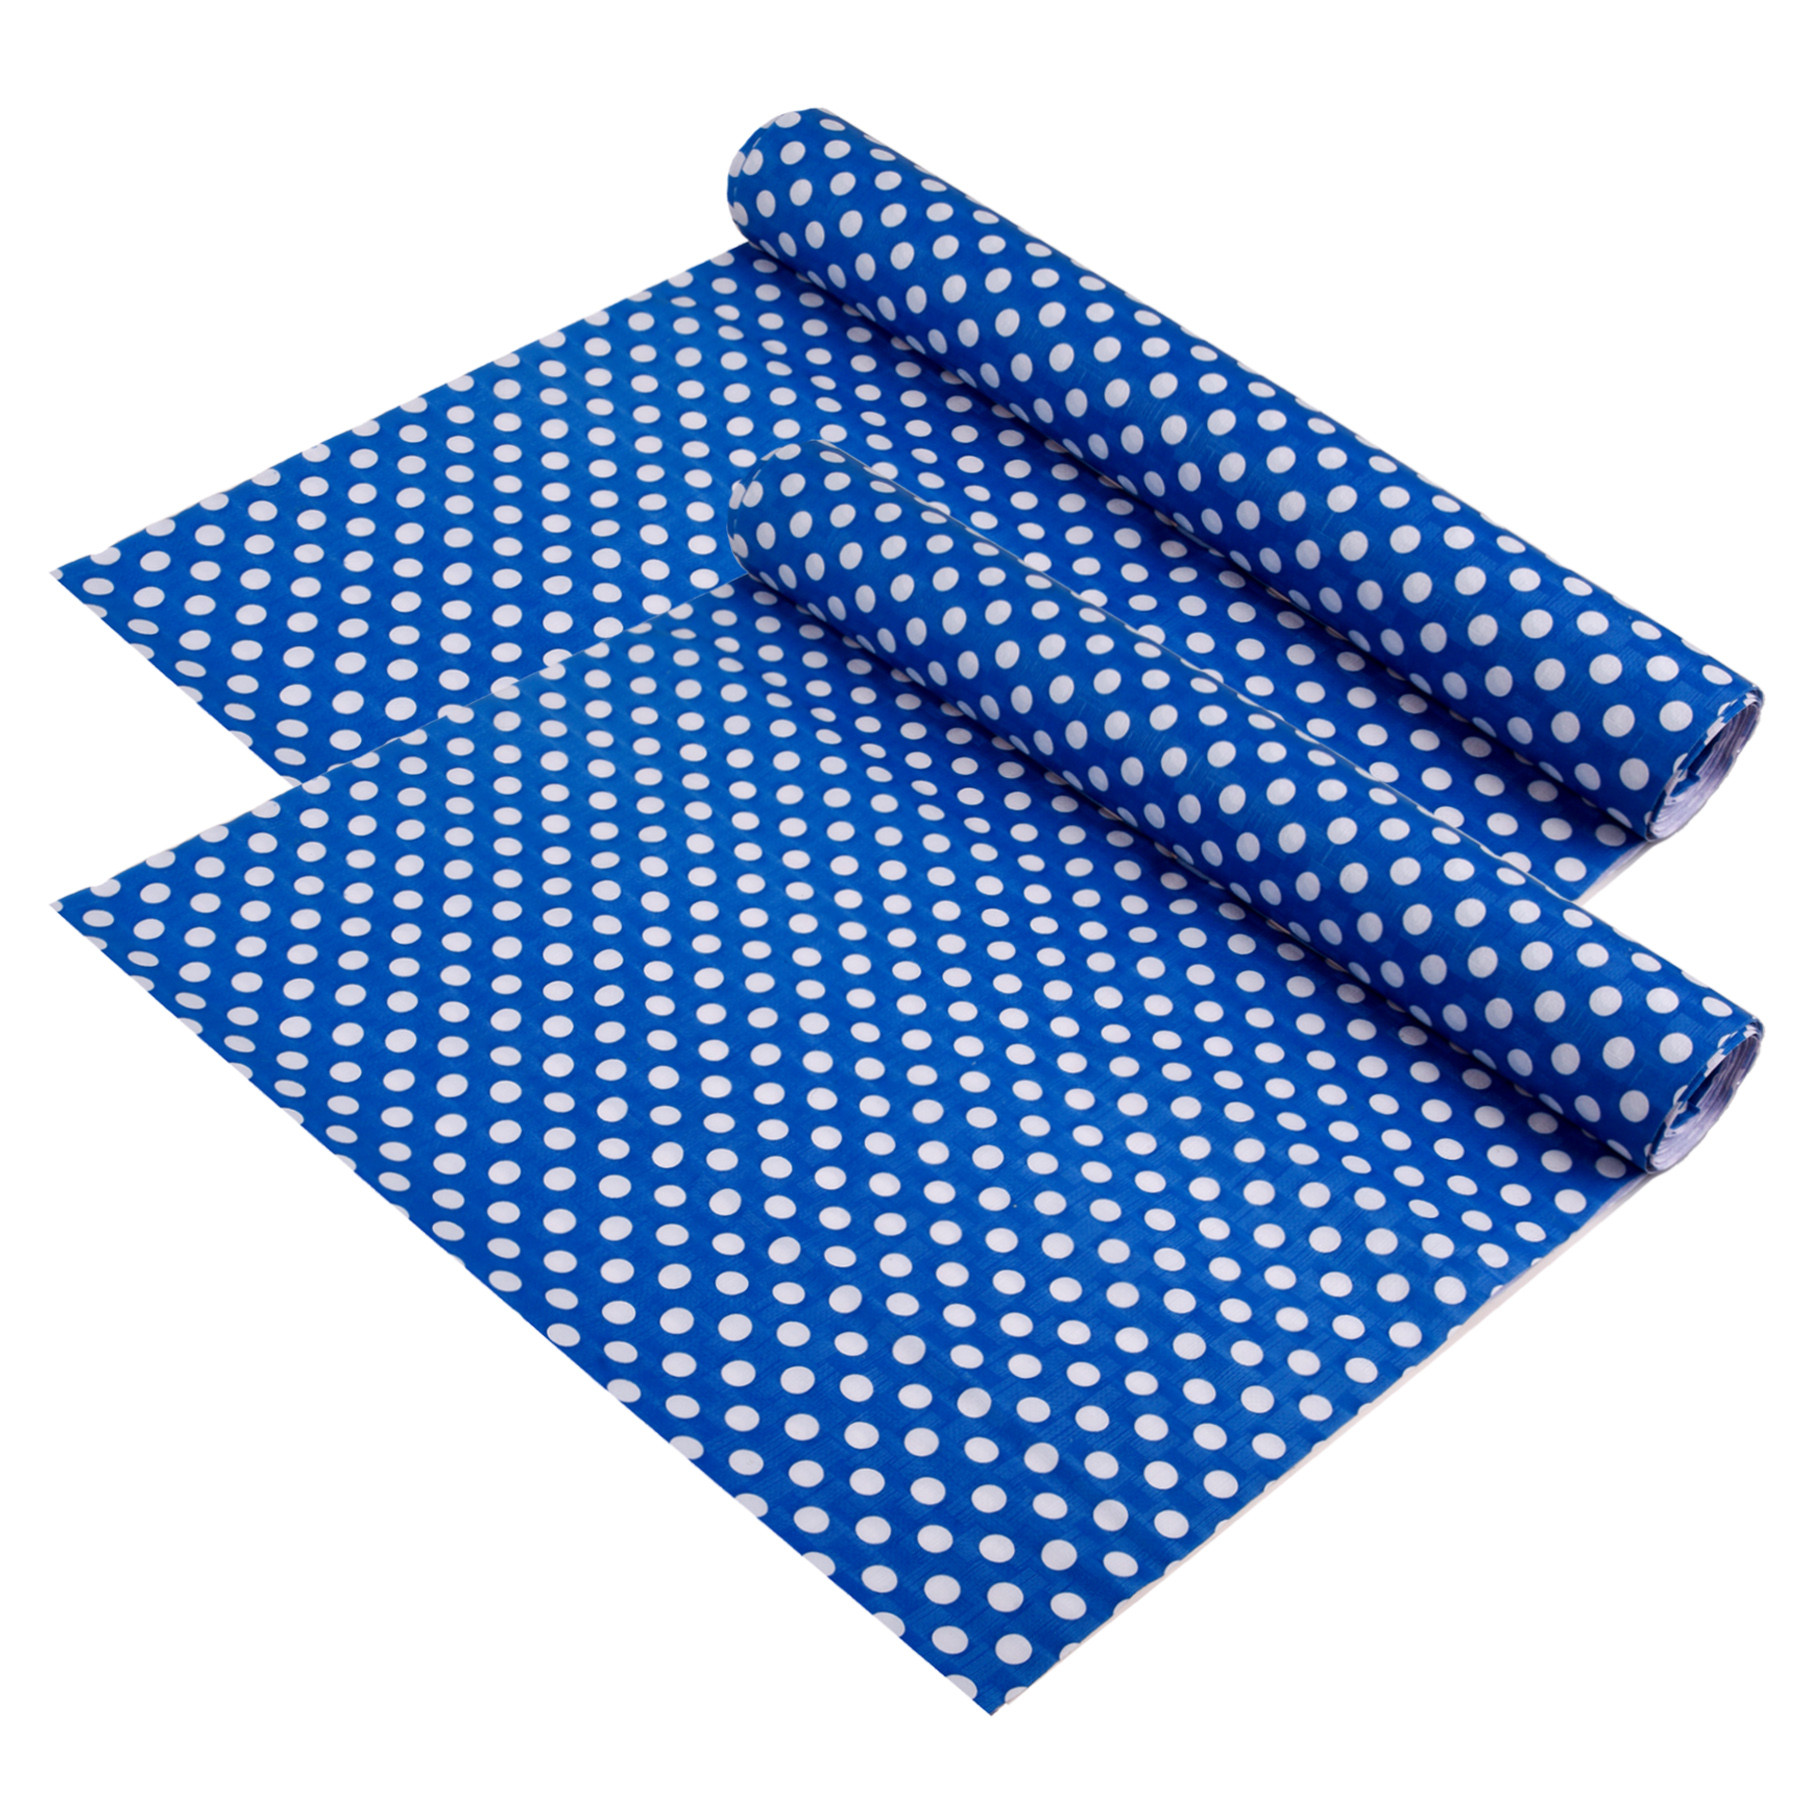 Kuber Industries Shelf Liner | Kitchen Cabinet Shelf Protector | Kitchen Liners for Cabinets and Drawers | Drawer Liner Mat | Dot-Print Shelf Liner Cabinet Mat | 5 MTR | Royal Blue